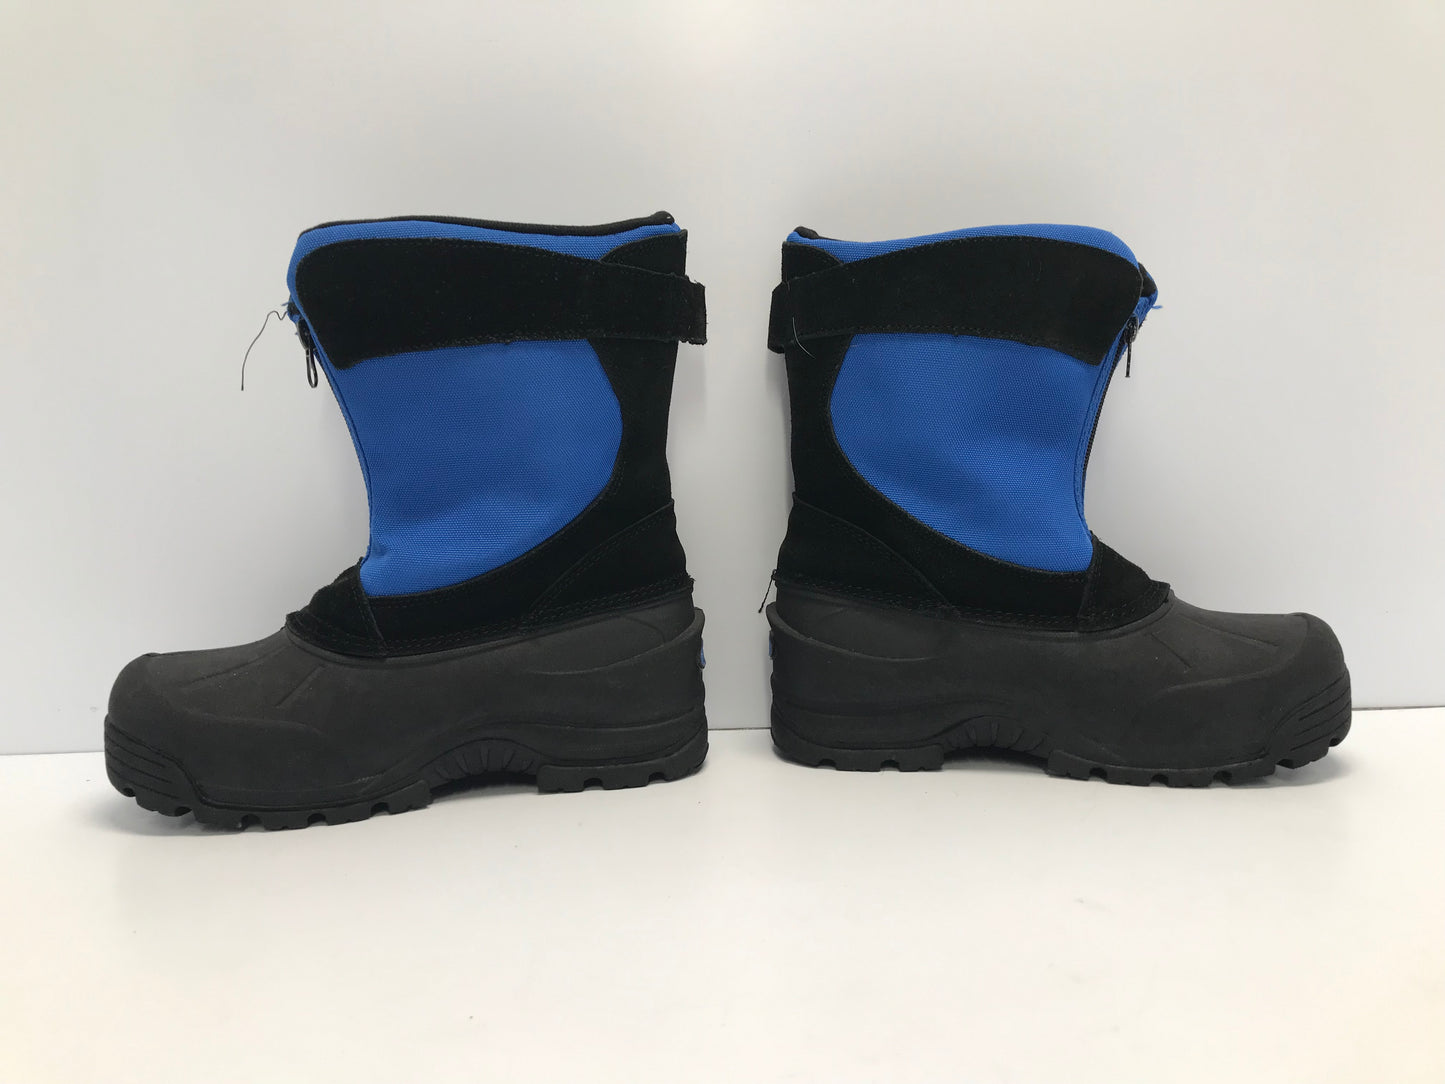 Winter Boots Child Size 4 Canadian Blue Black With Liner Like New